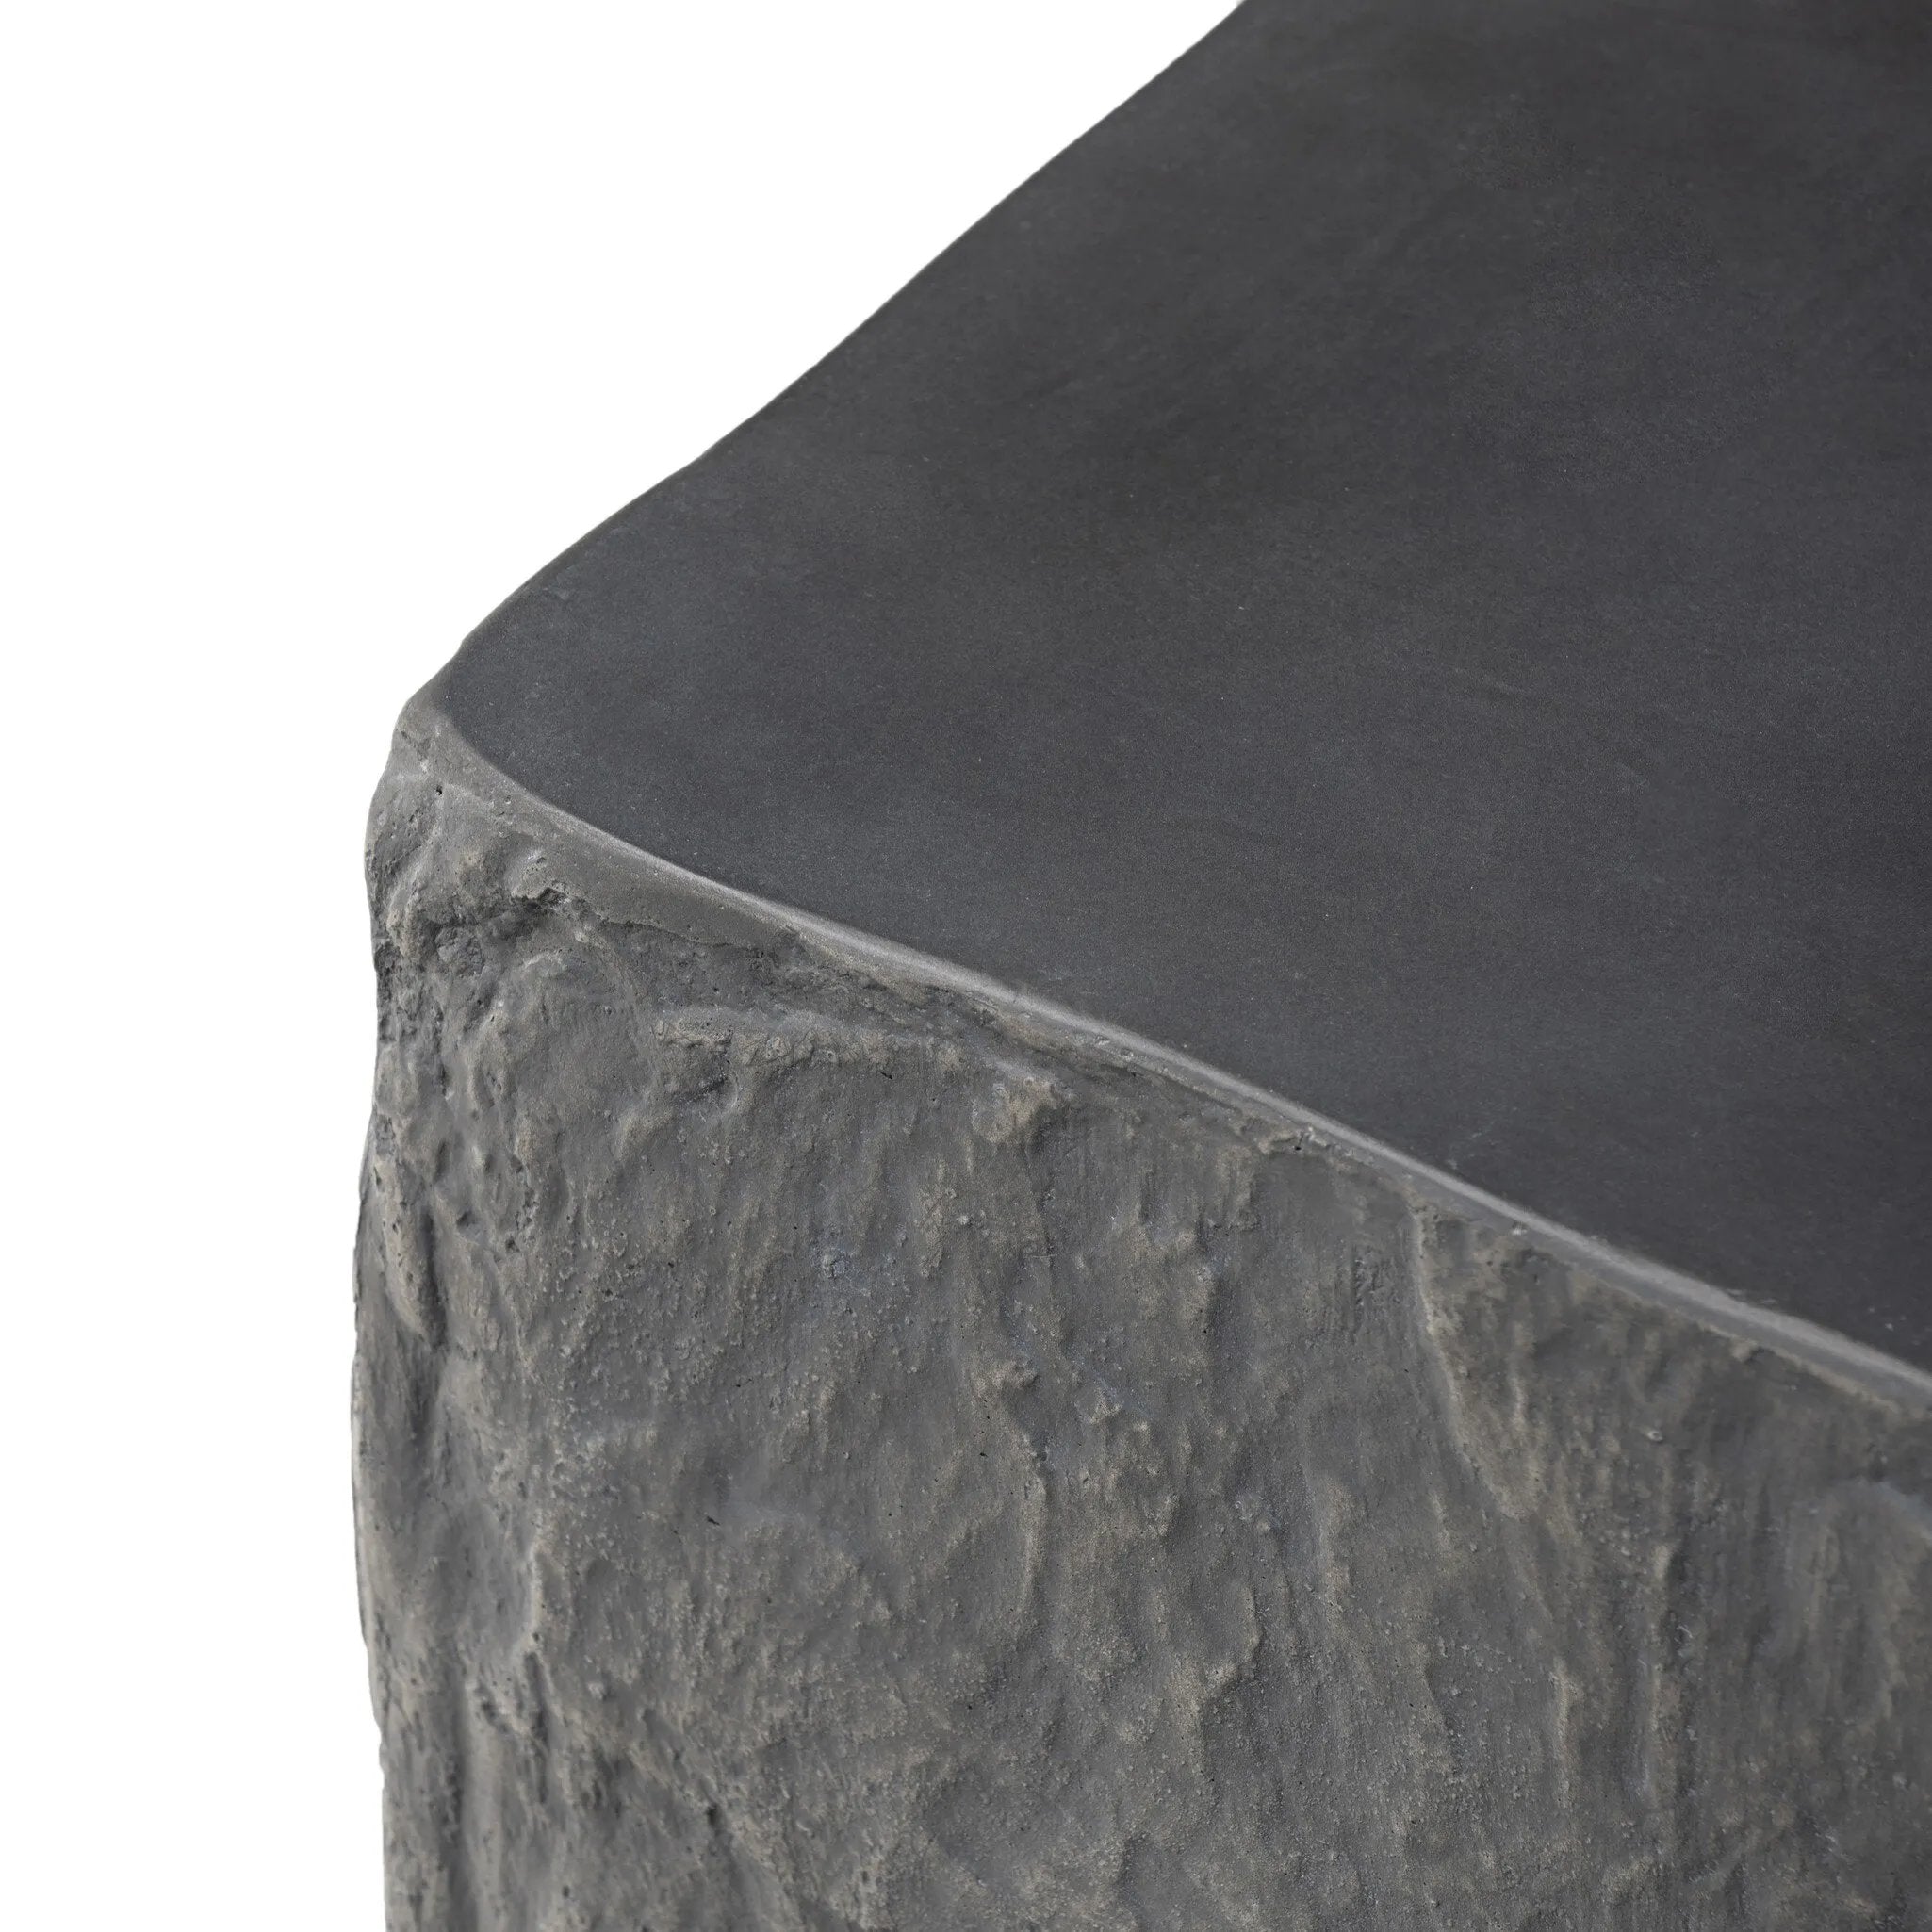 Cast black concrete features heavily textured sides that resemble natural slate, paired with a smoothed tabletop.Collection: Chandle Amethyst Home provides interior design, new home construction design consulting, vintage area rugs, and lighting in the Los Angeles metro area.